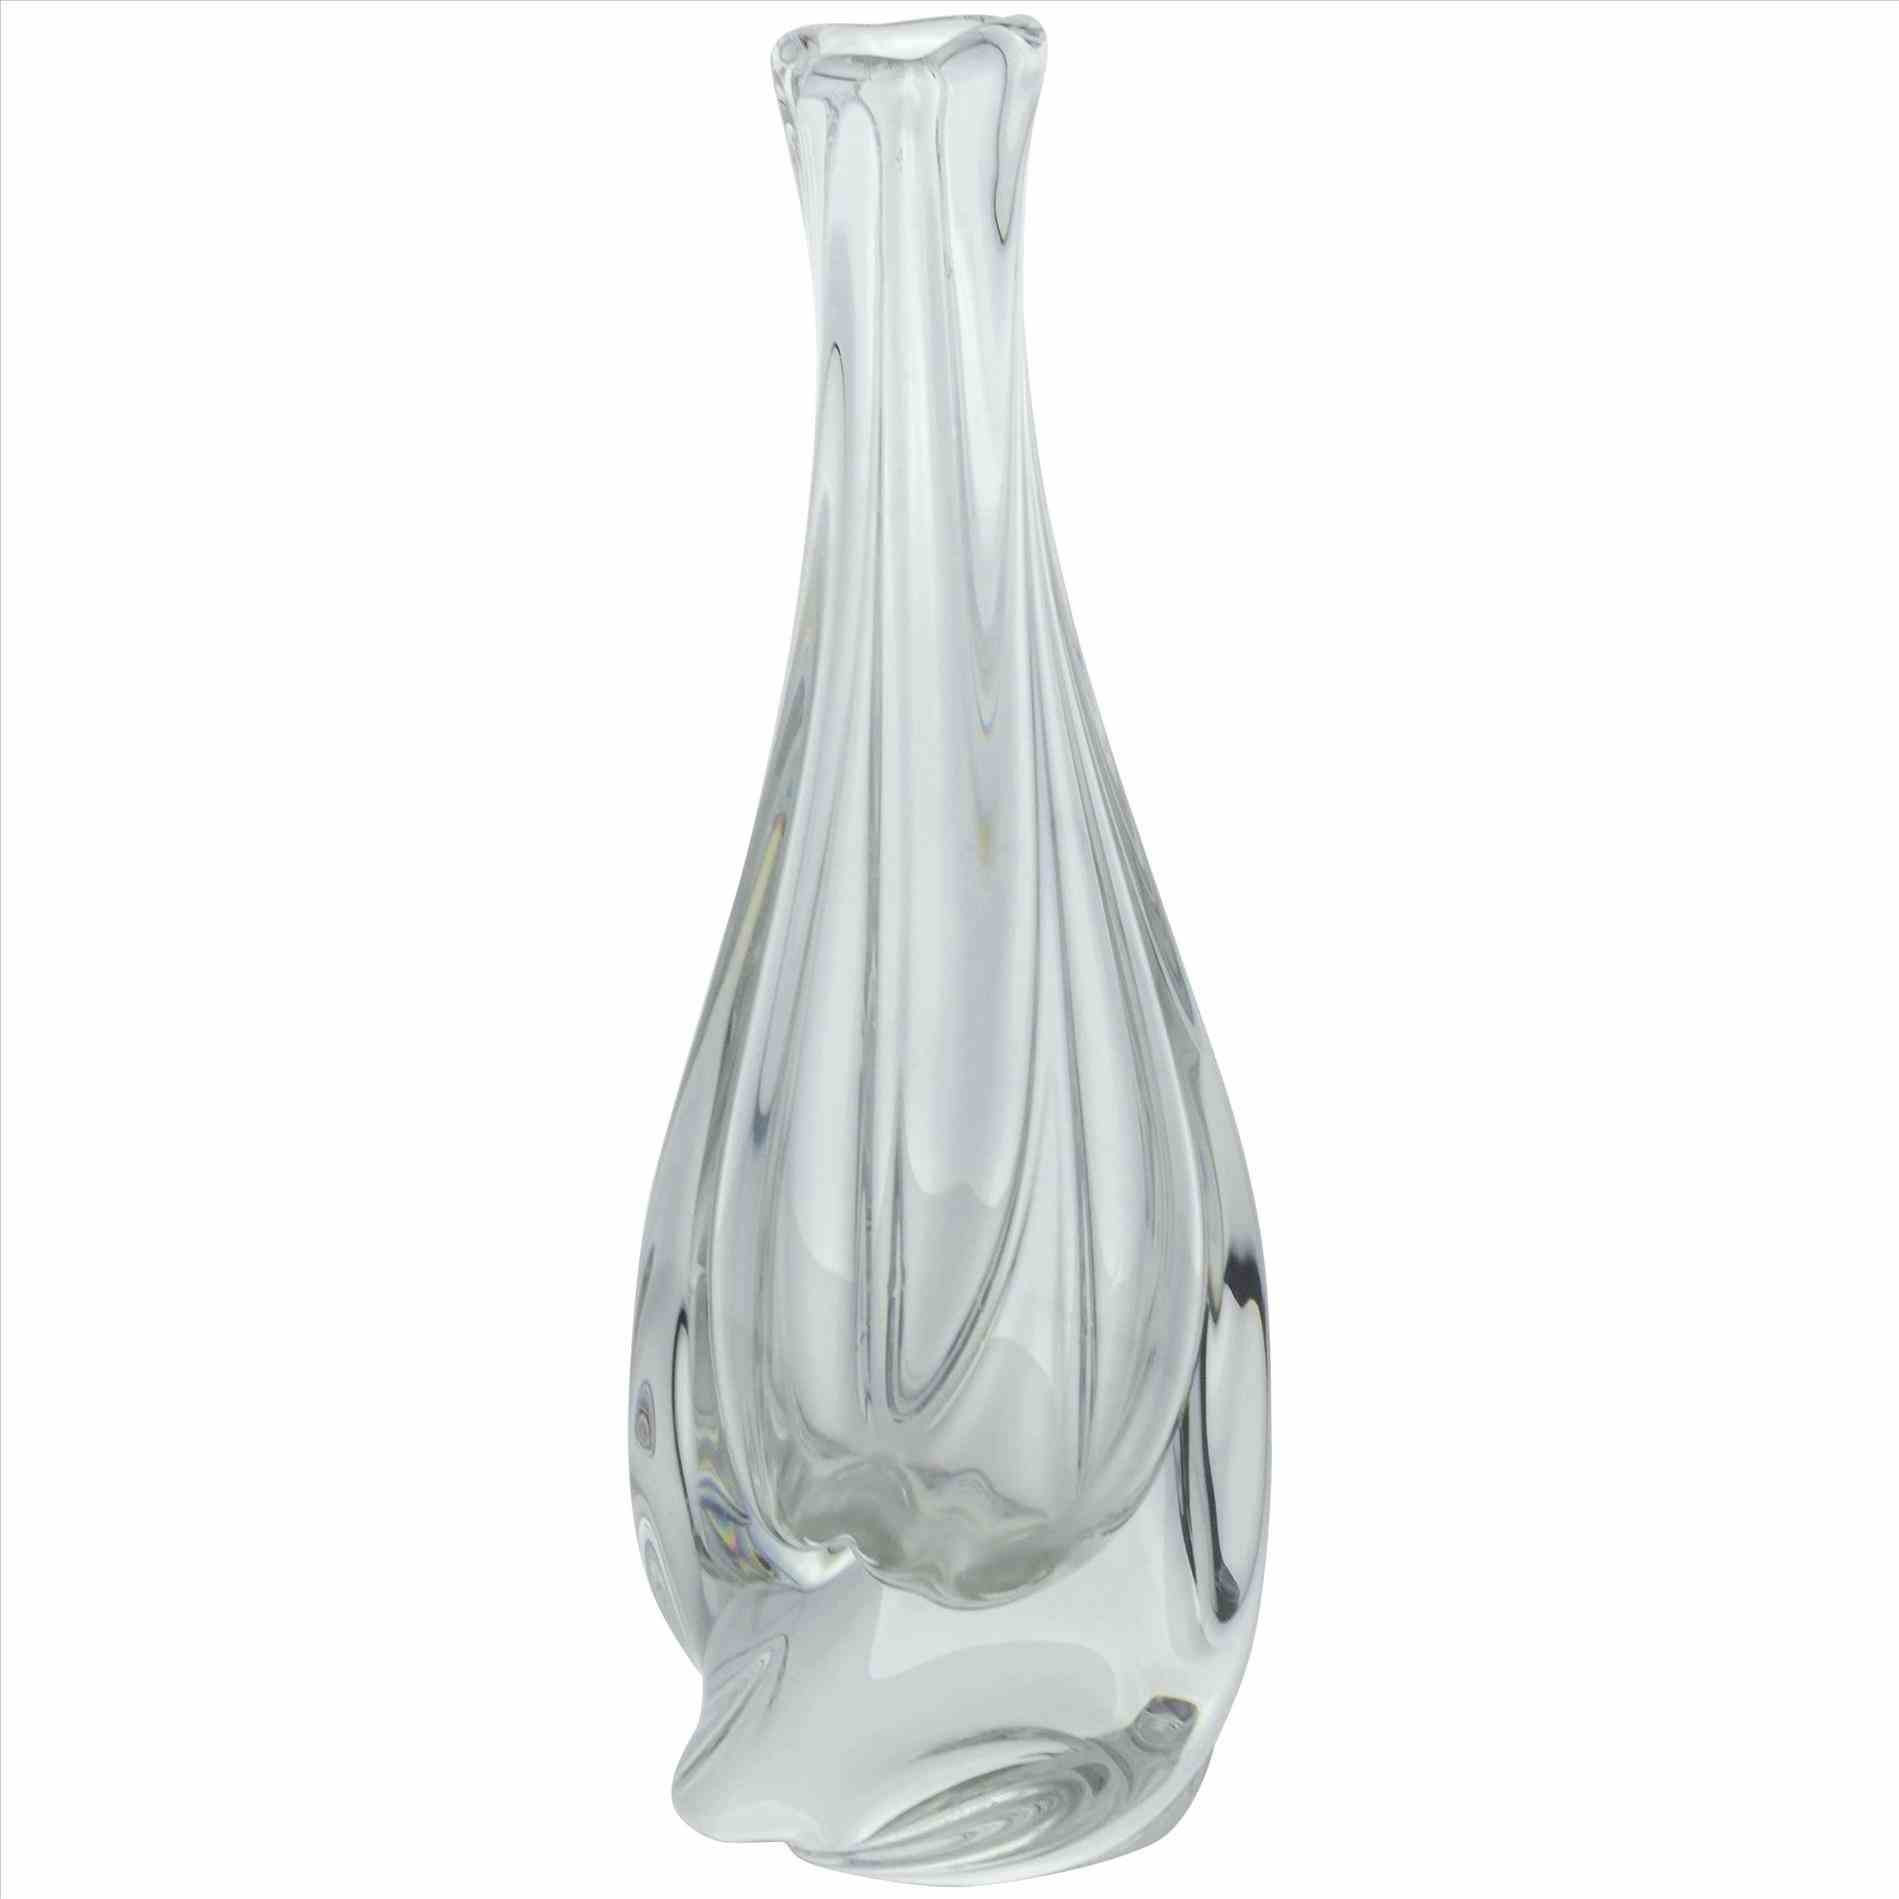 14 Lovely Silver Trumpet Vases Bulk 2024 free download silver trumpet vases bulk of silver vases wholesale pandoraocharms us inside silver vases wholesale for u flowers and supplies